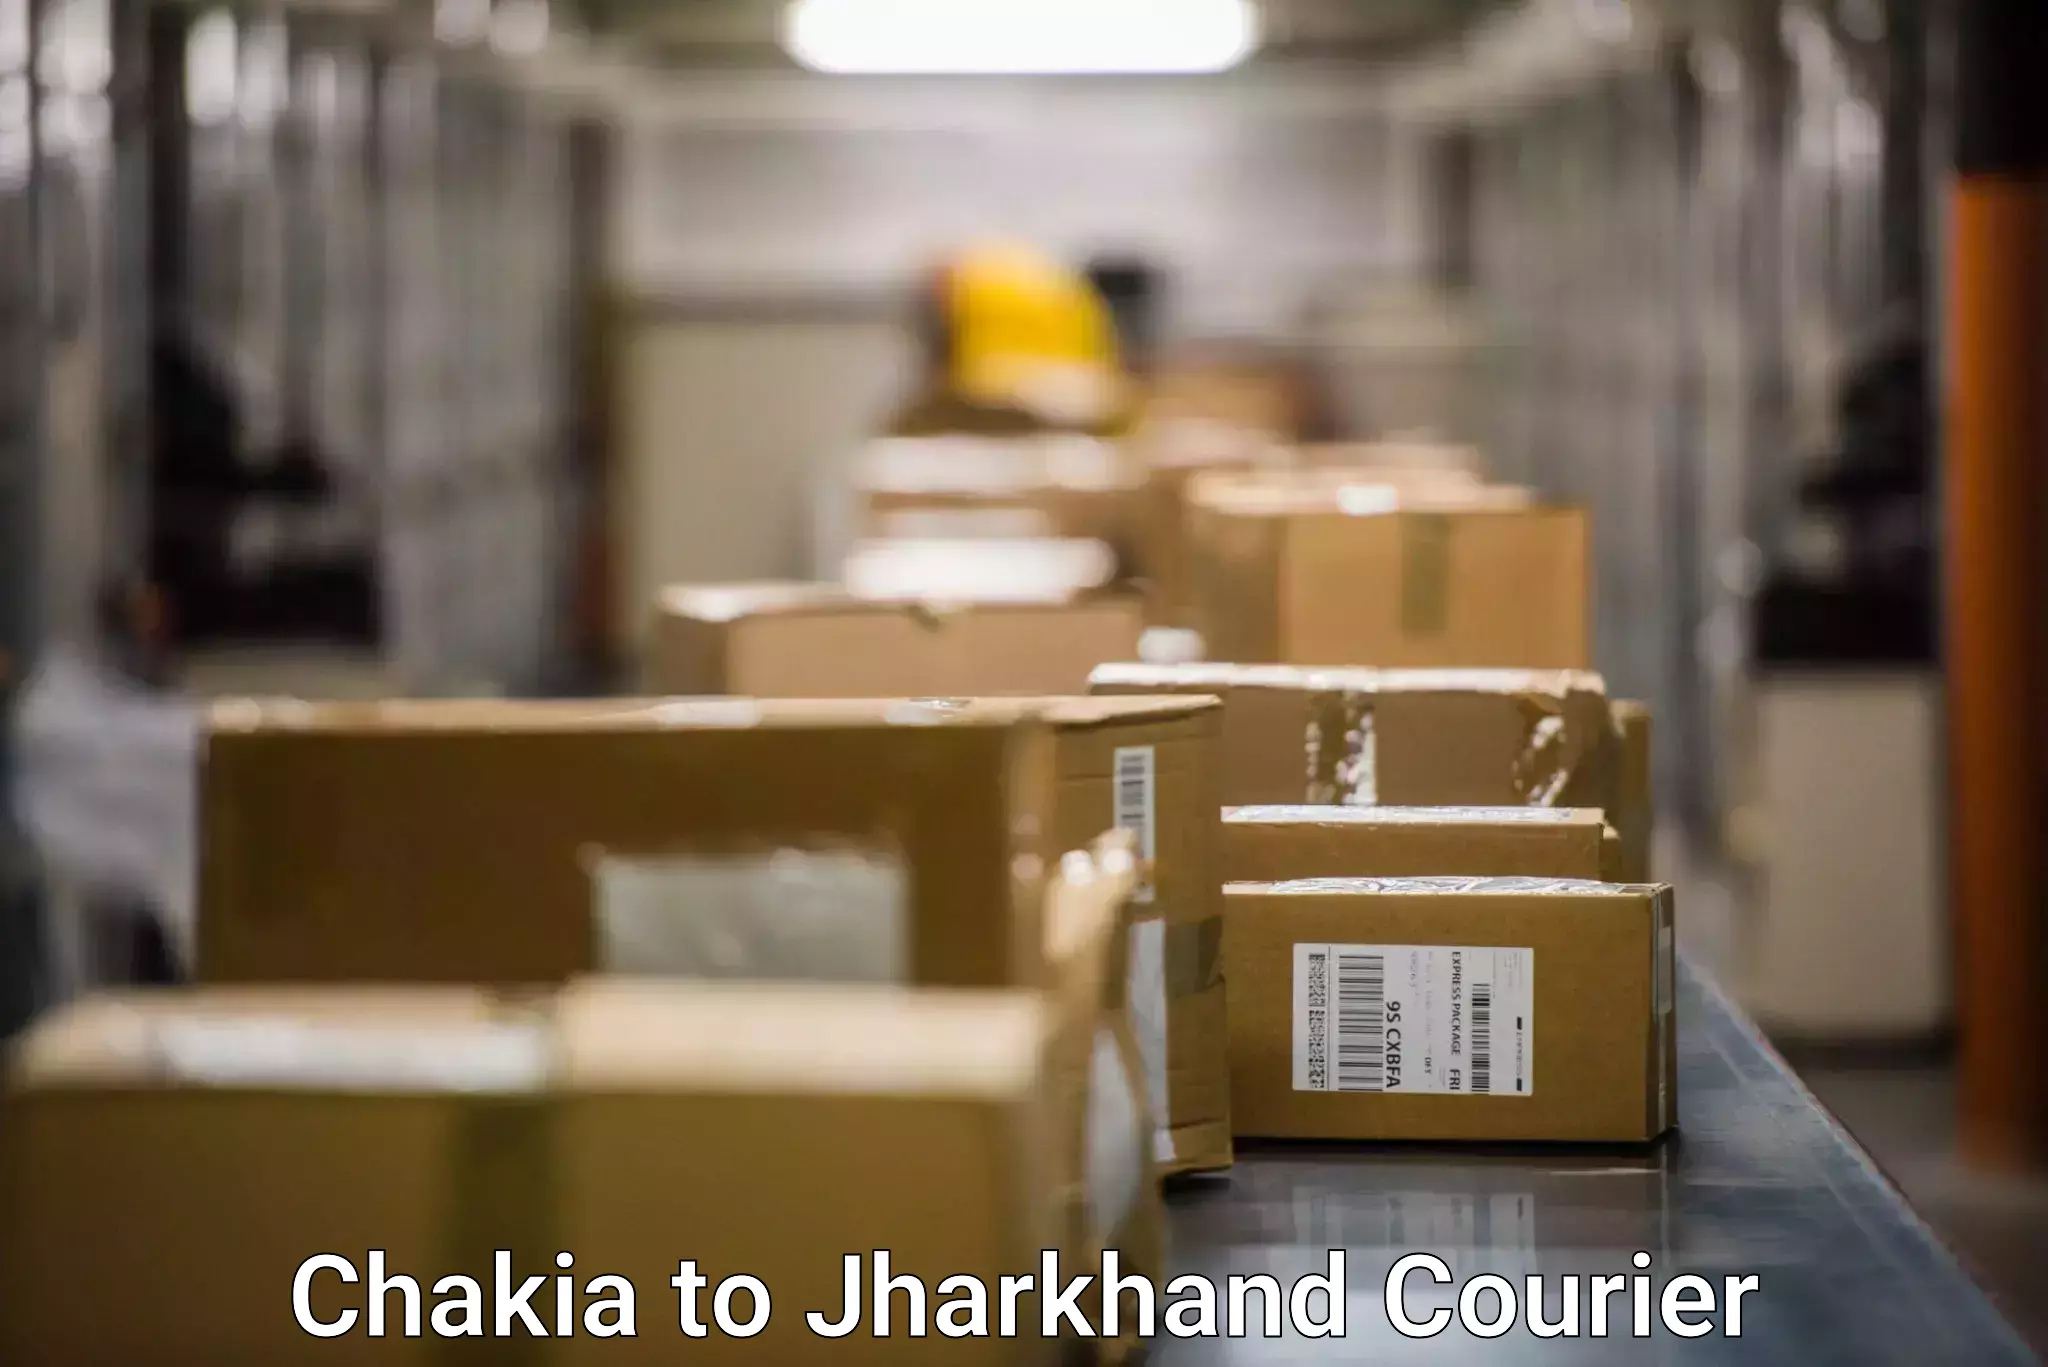 Round-the-clock parcel delivery Chakia to Peterbar